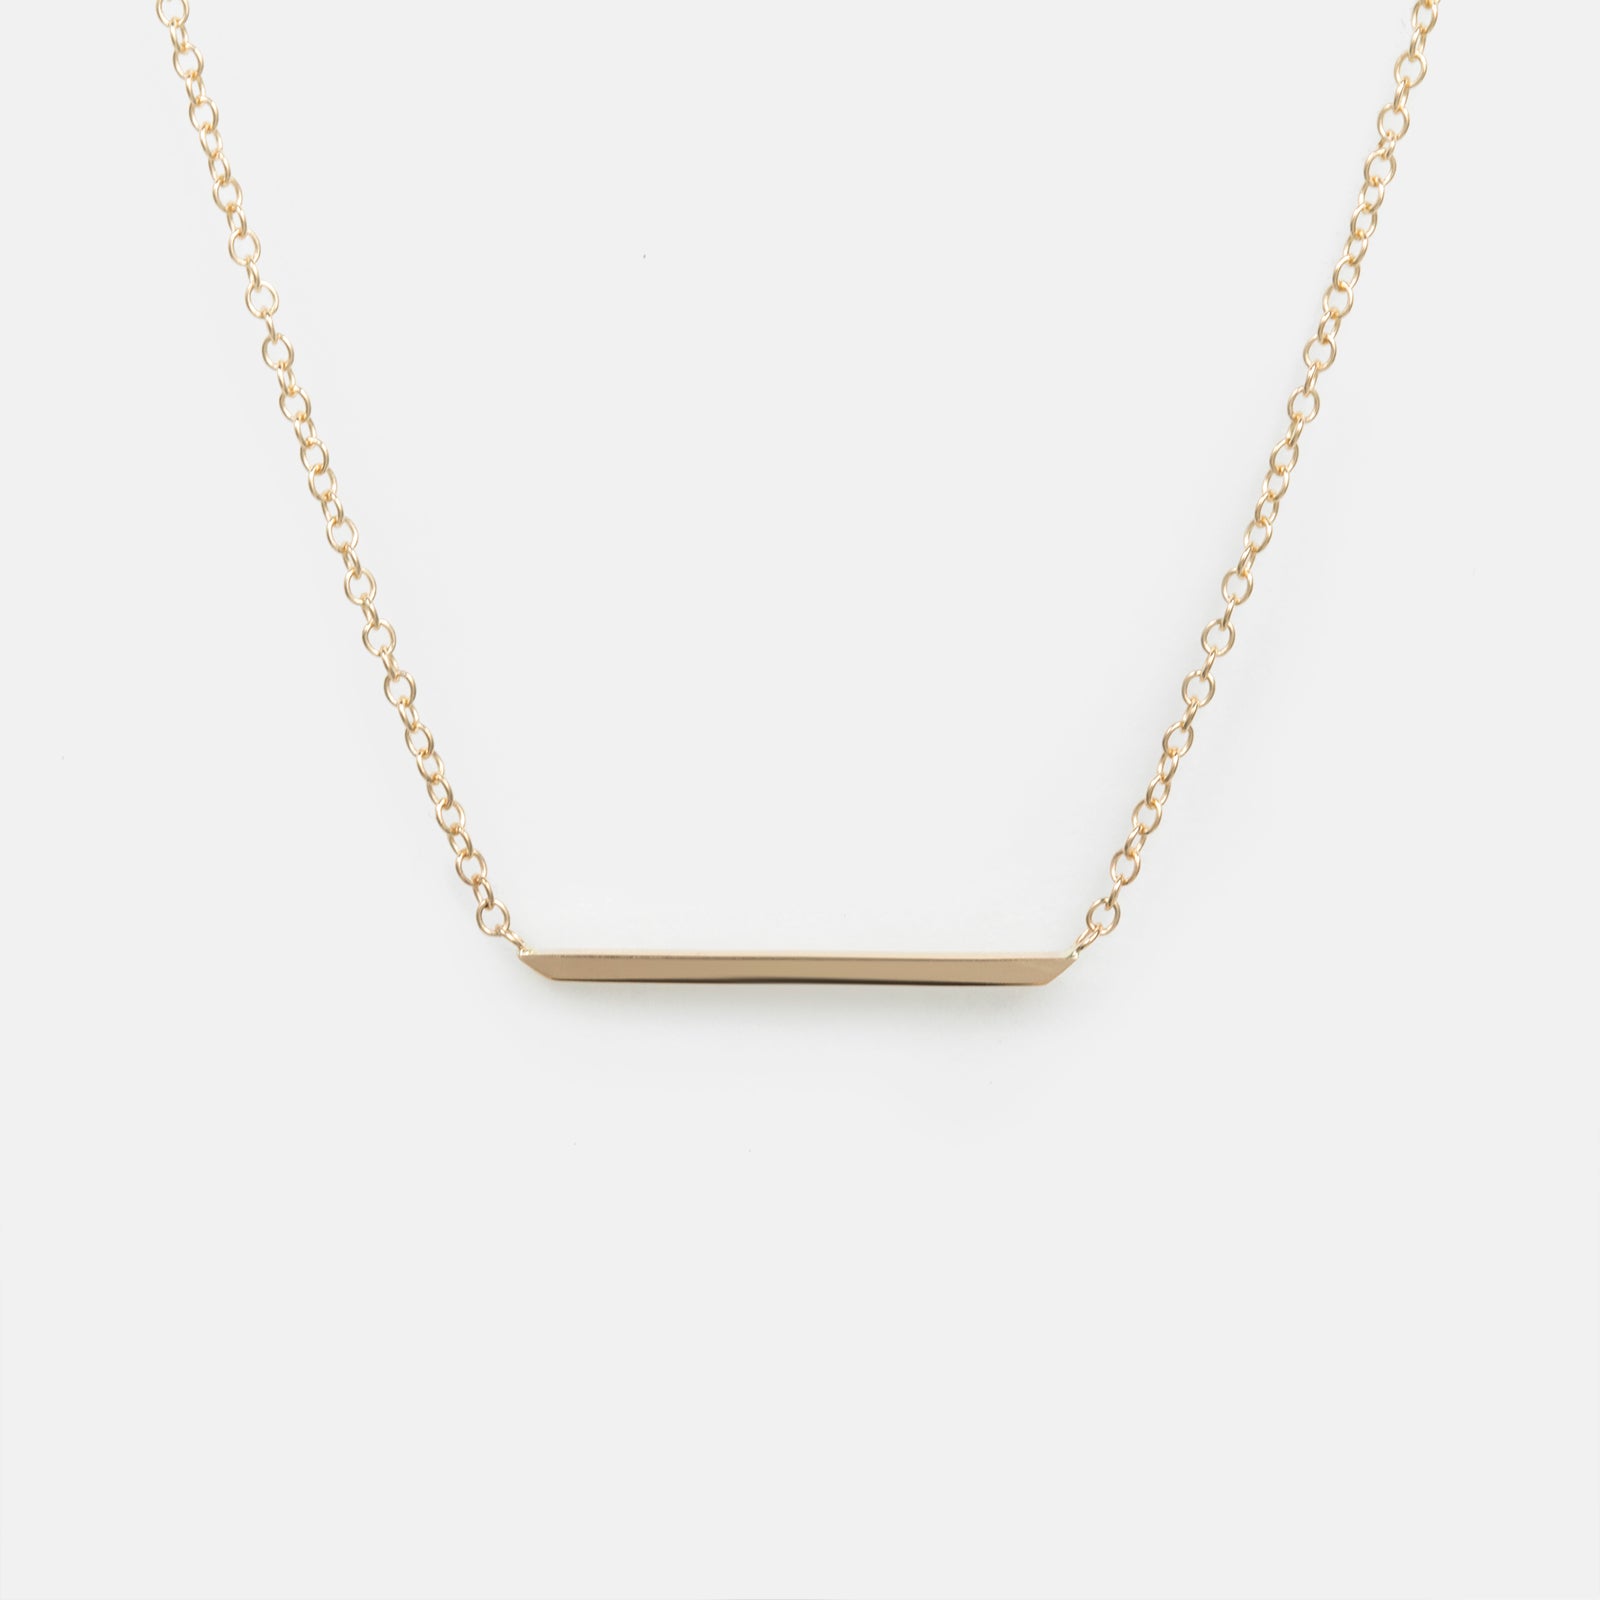 Unisex Vati Necklace in 14k Yellow Gold by SHW Fine Jewelry Made in New York City